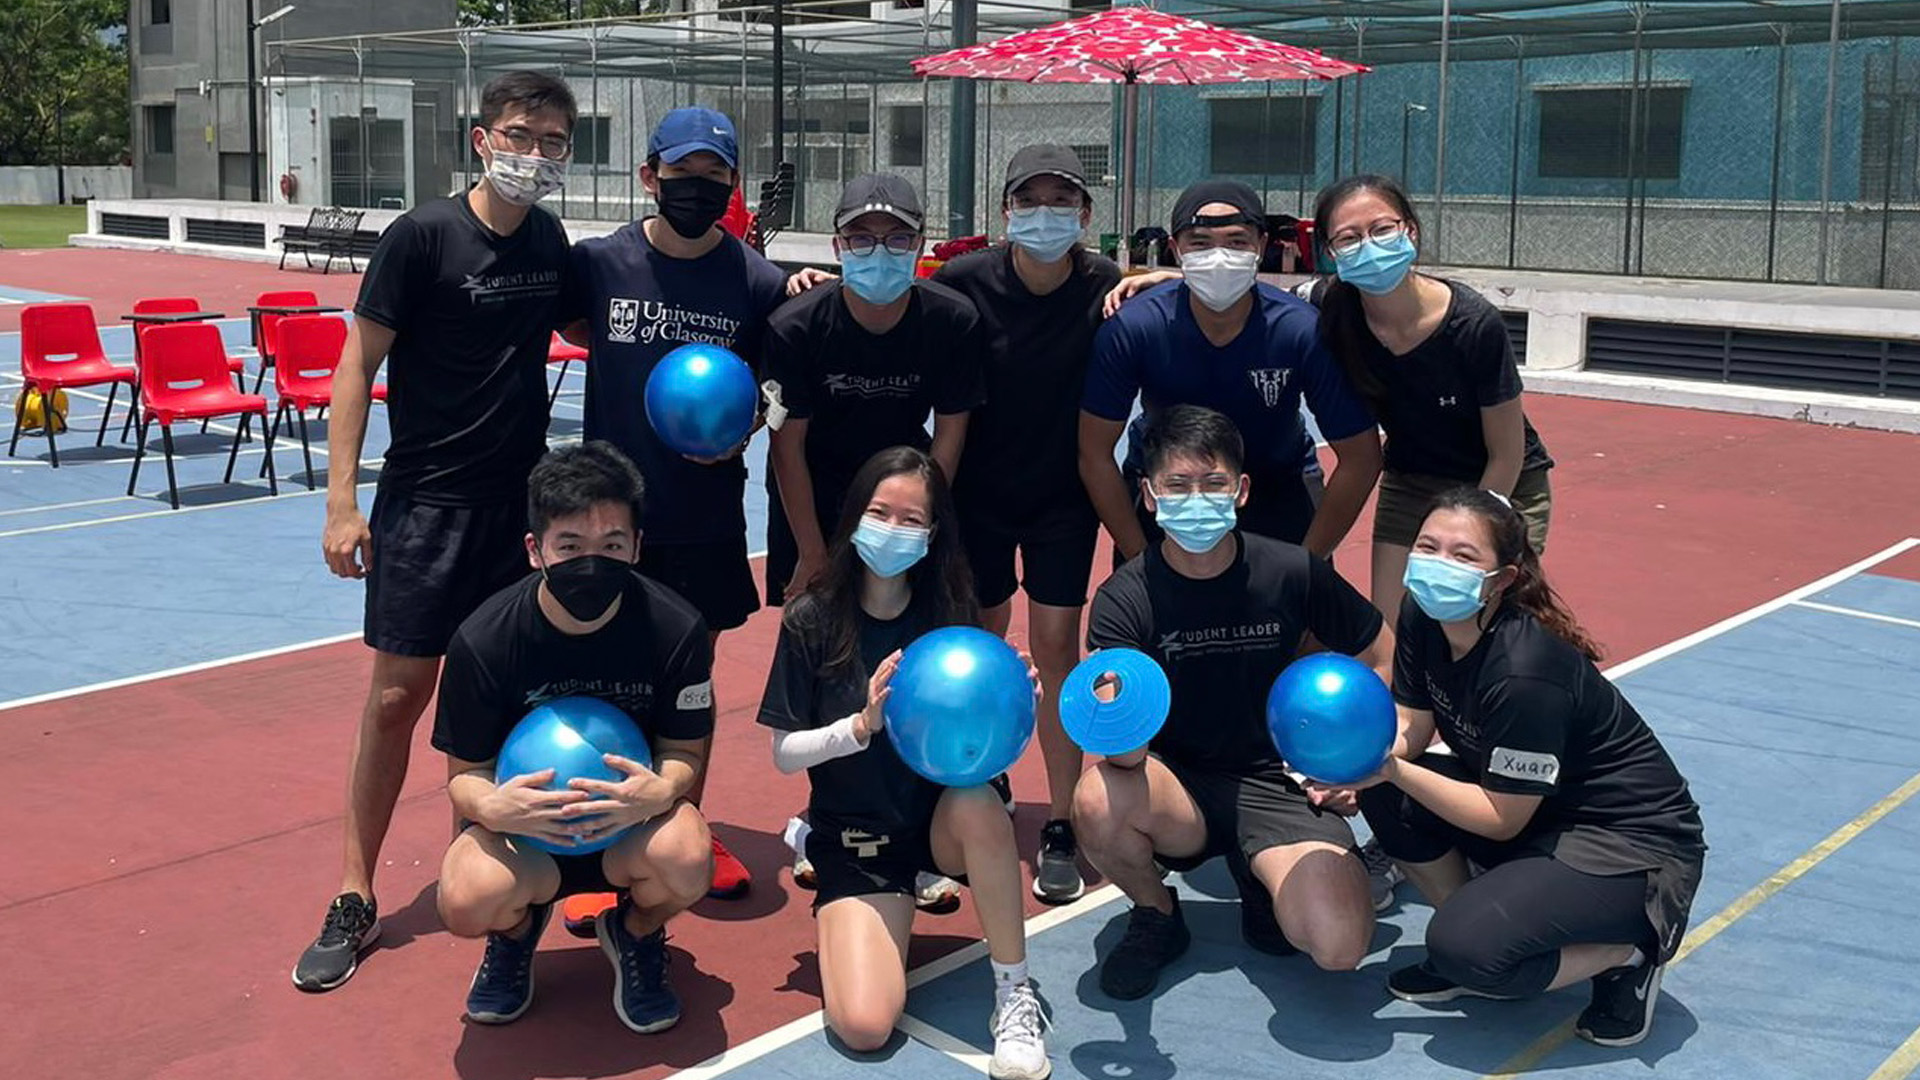 DN_SITintegrates group photo during dodgeball event